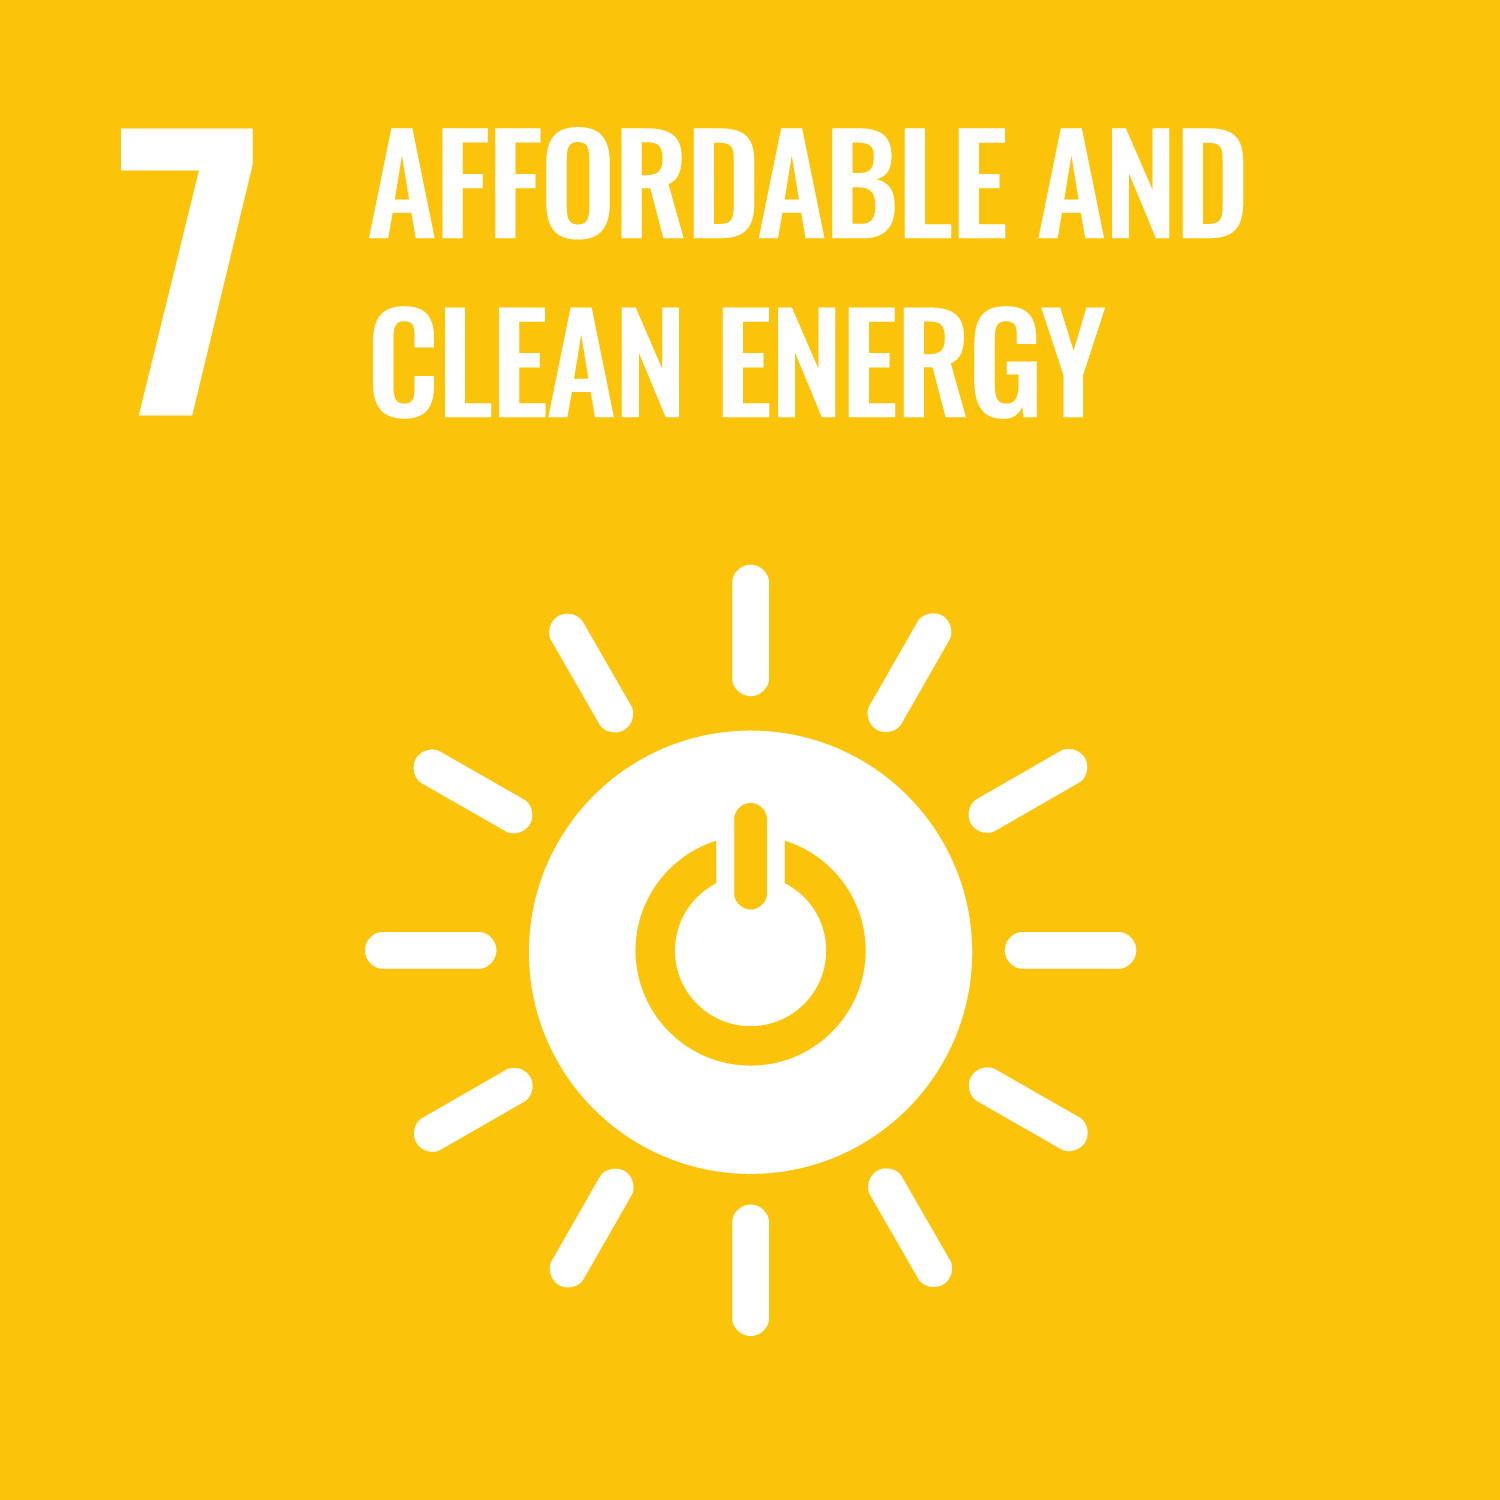 7.Affordable and Clean Energy